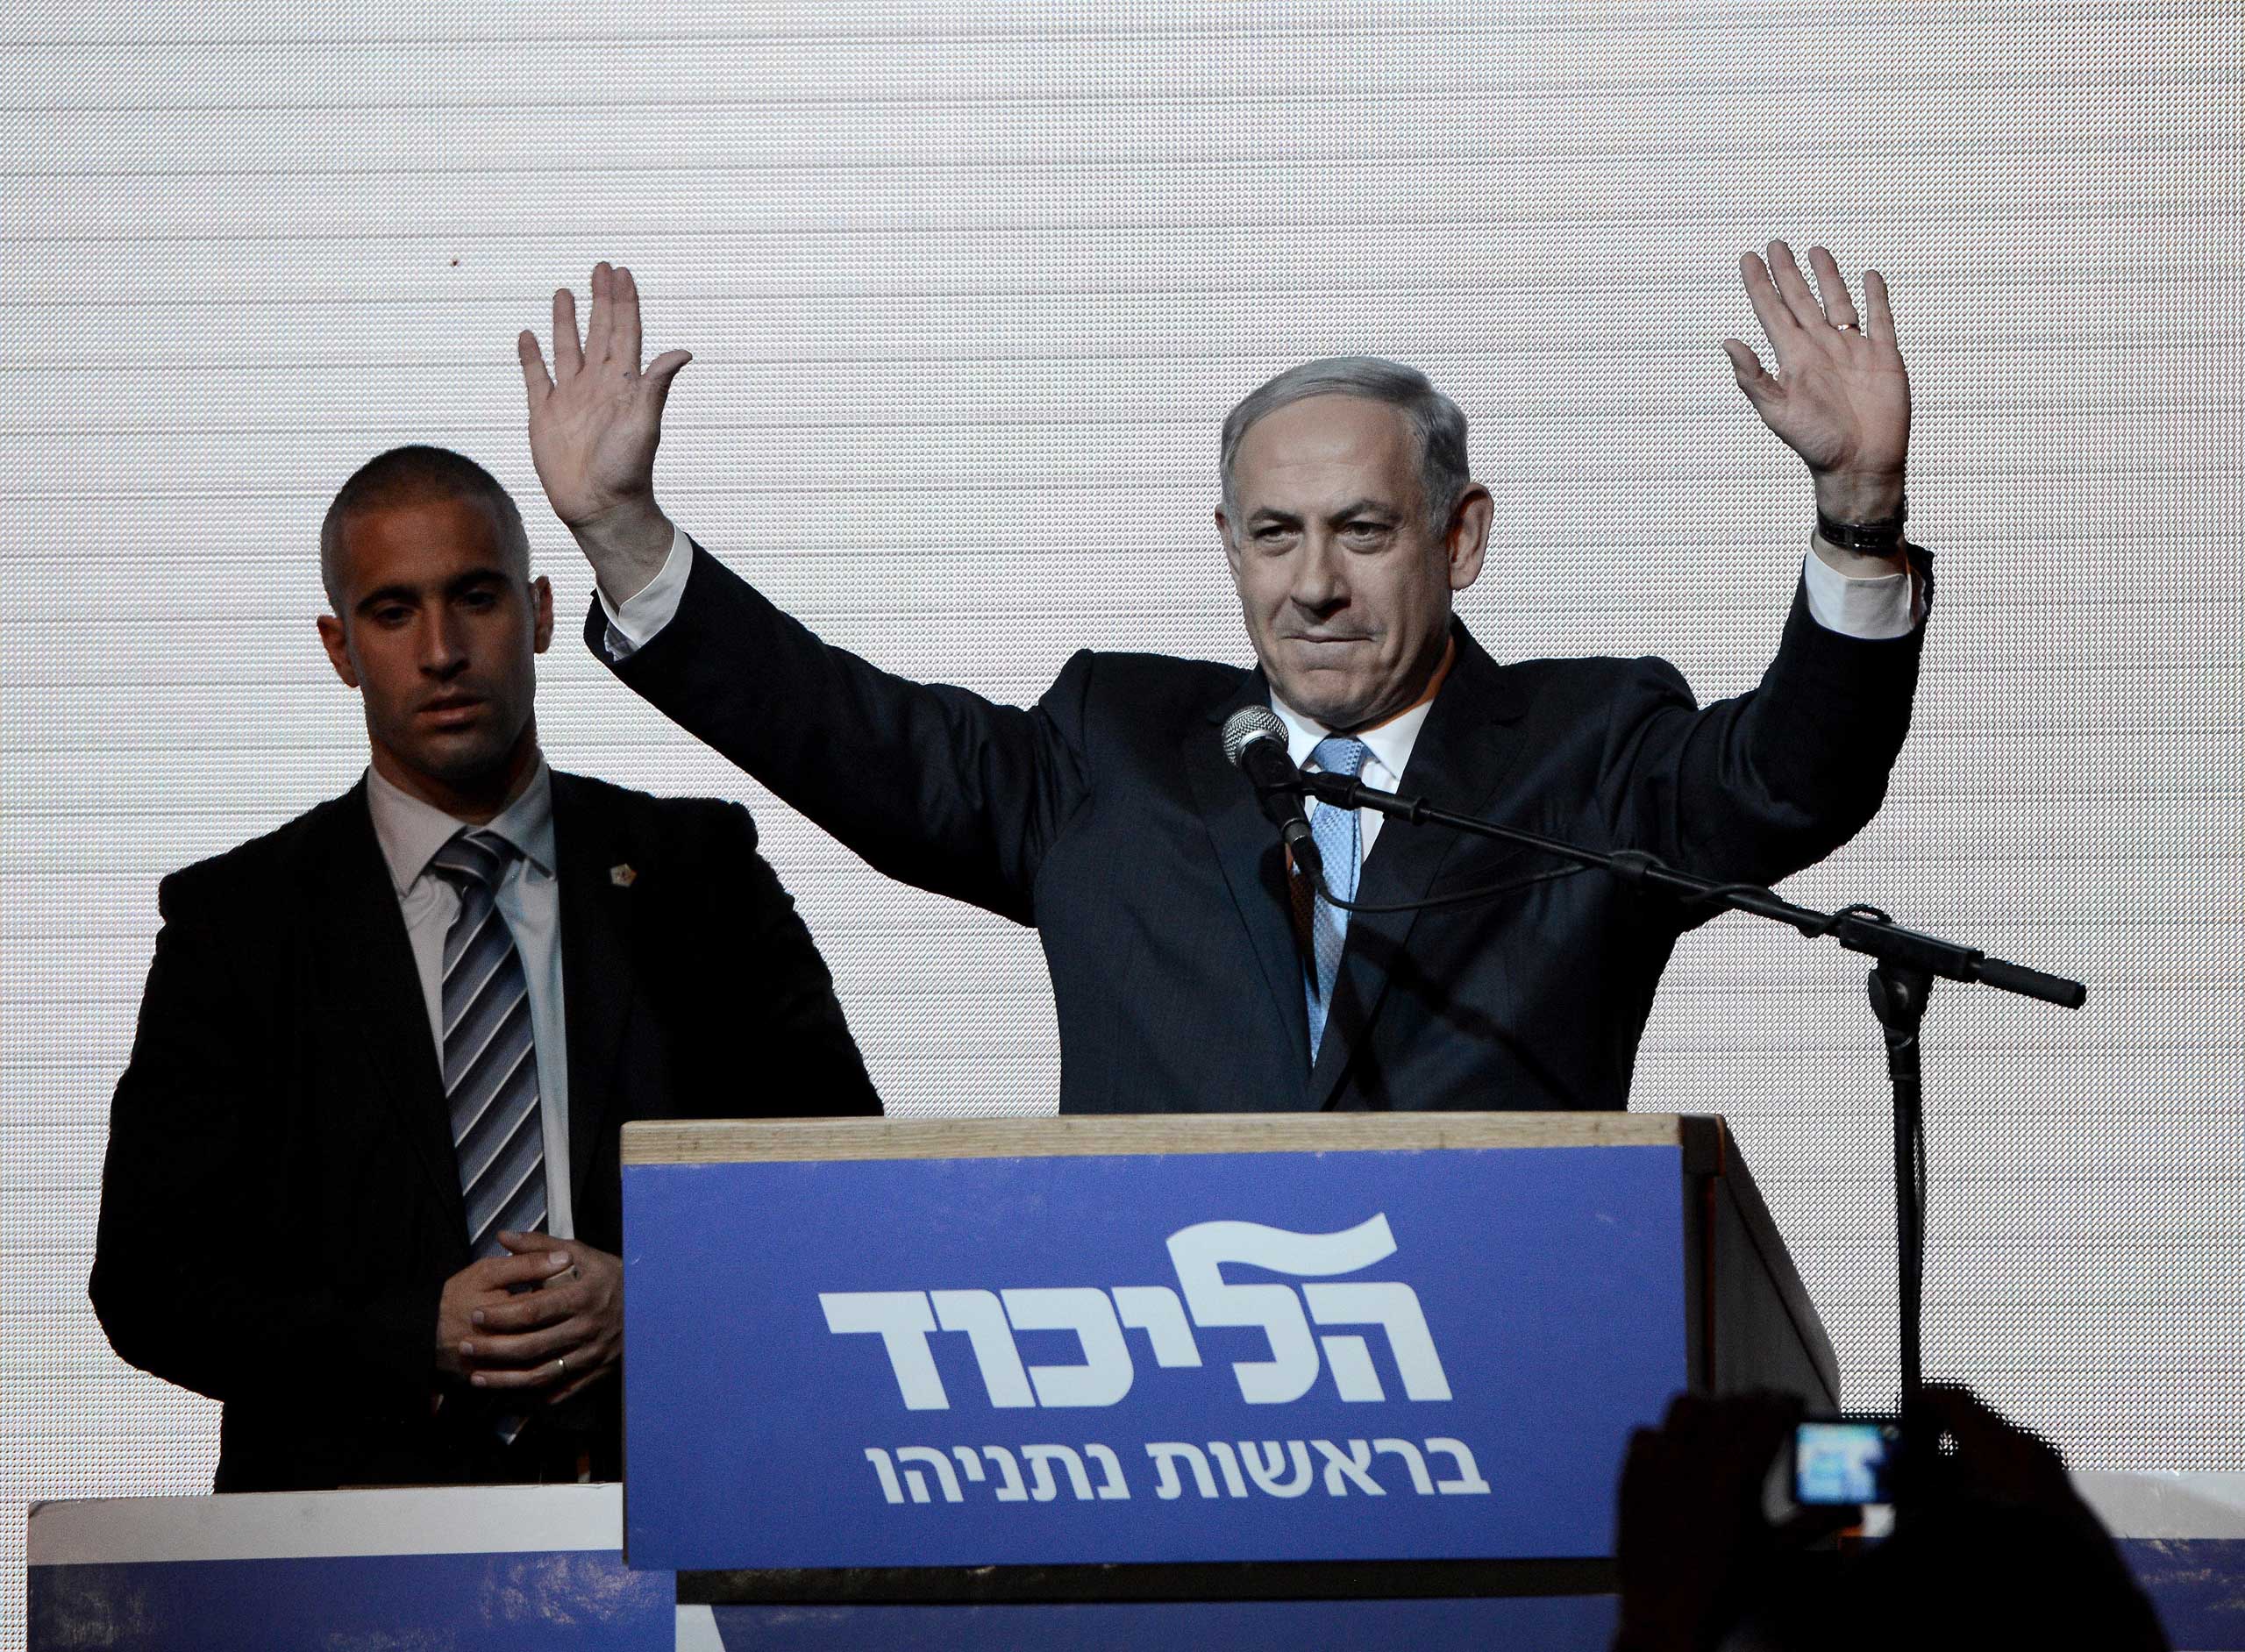 Israeli Prime Minister and the leader of the Likud Party Benjamin Netanyahu greets supporters at the party's election headquarters after the first results of the Israeli general election on March 18, 2015 in Tel Aviv, Israel. (Salih Zeki Fazlioglu—Anadolu Agency/Getty Images)